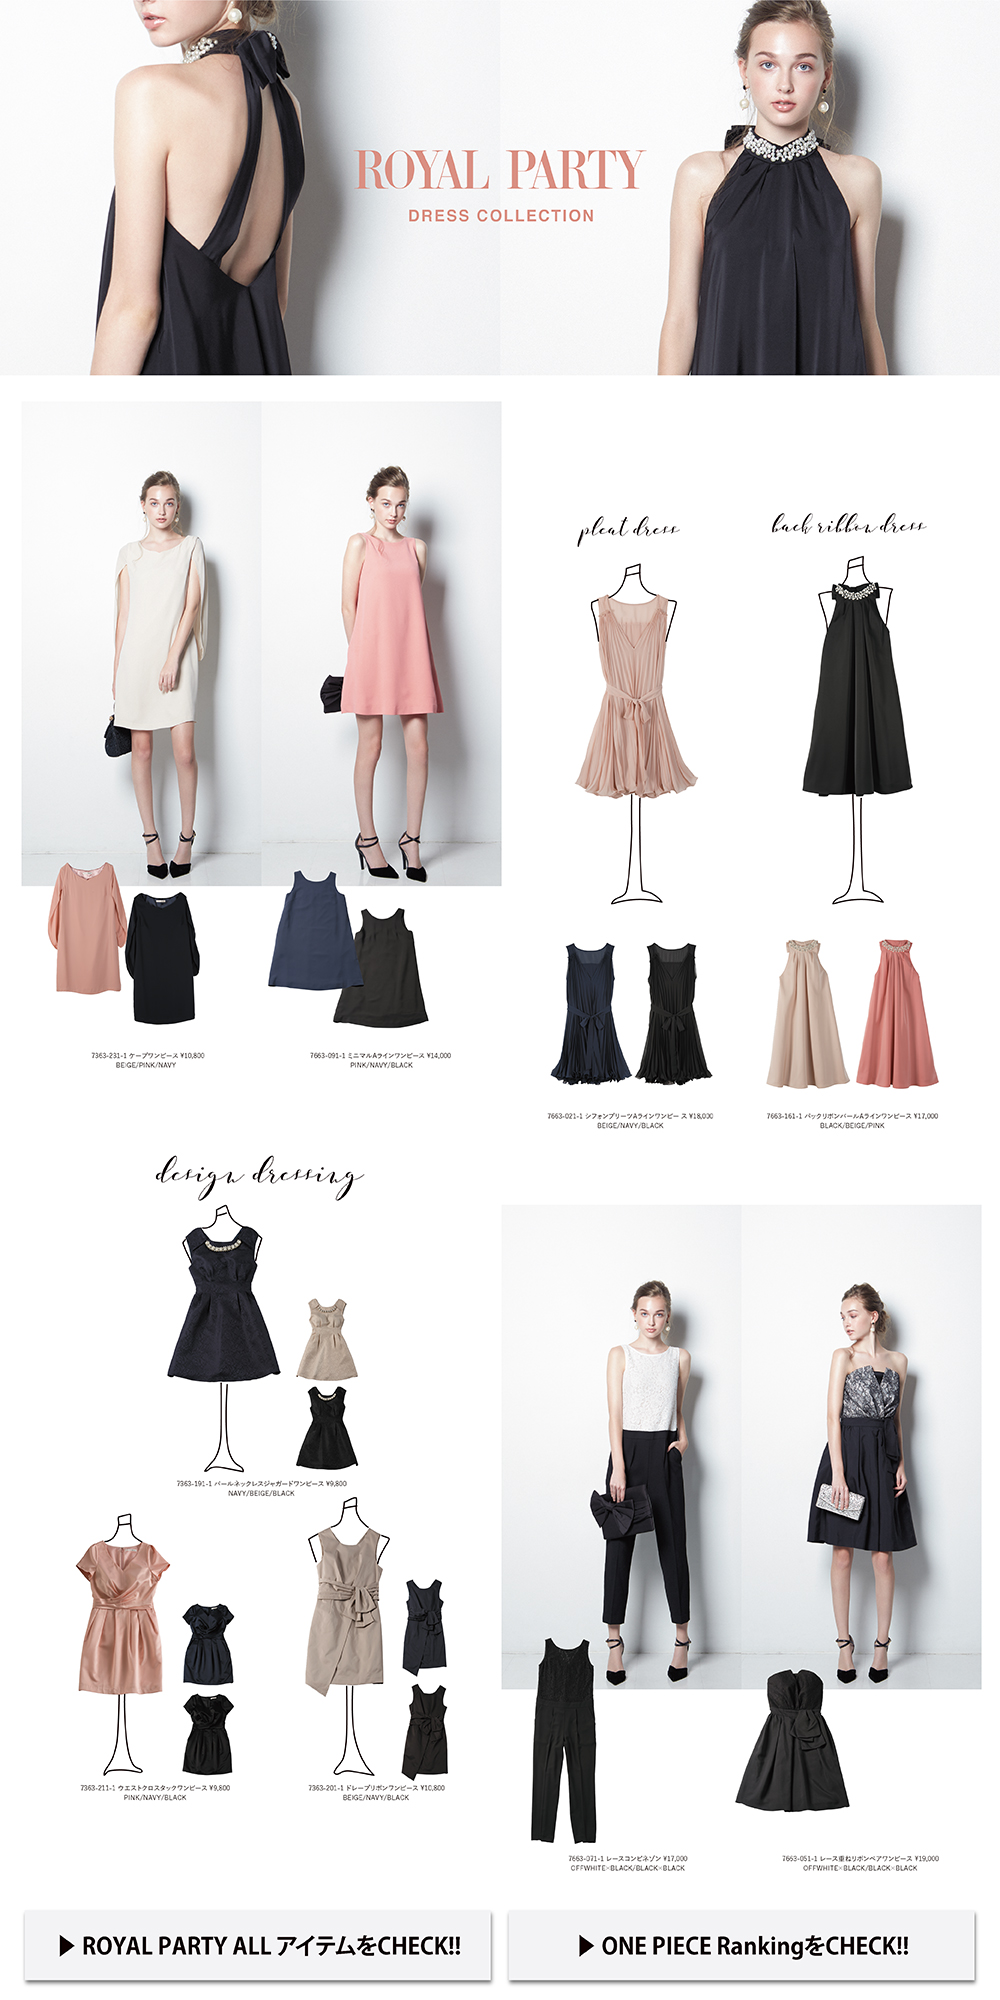 DRESS COLLECTION